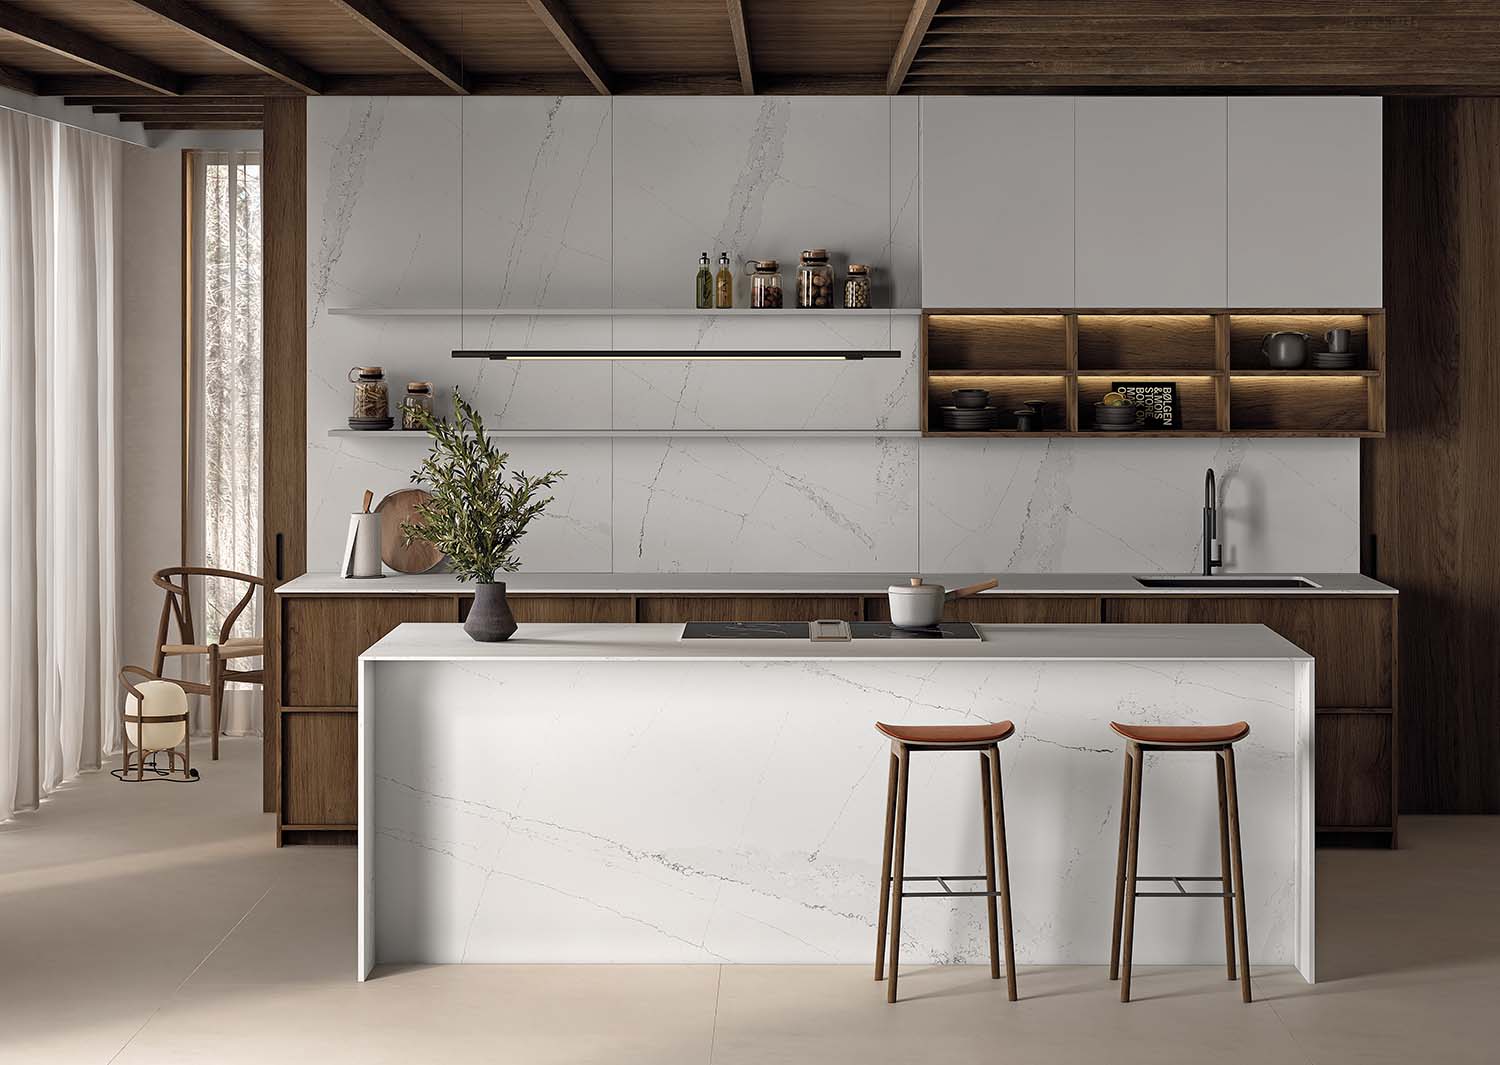 Image of Silestone Kitchen Ethereal Dusk web in Ethereal by Silestone®, Beauty Beyond Natural - Cosentino